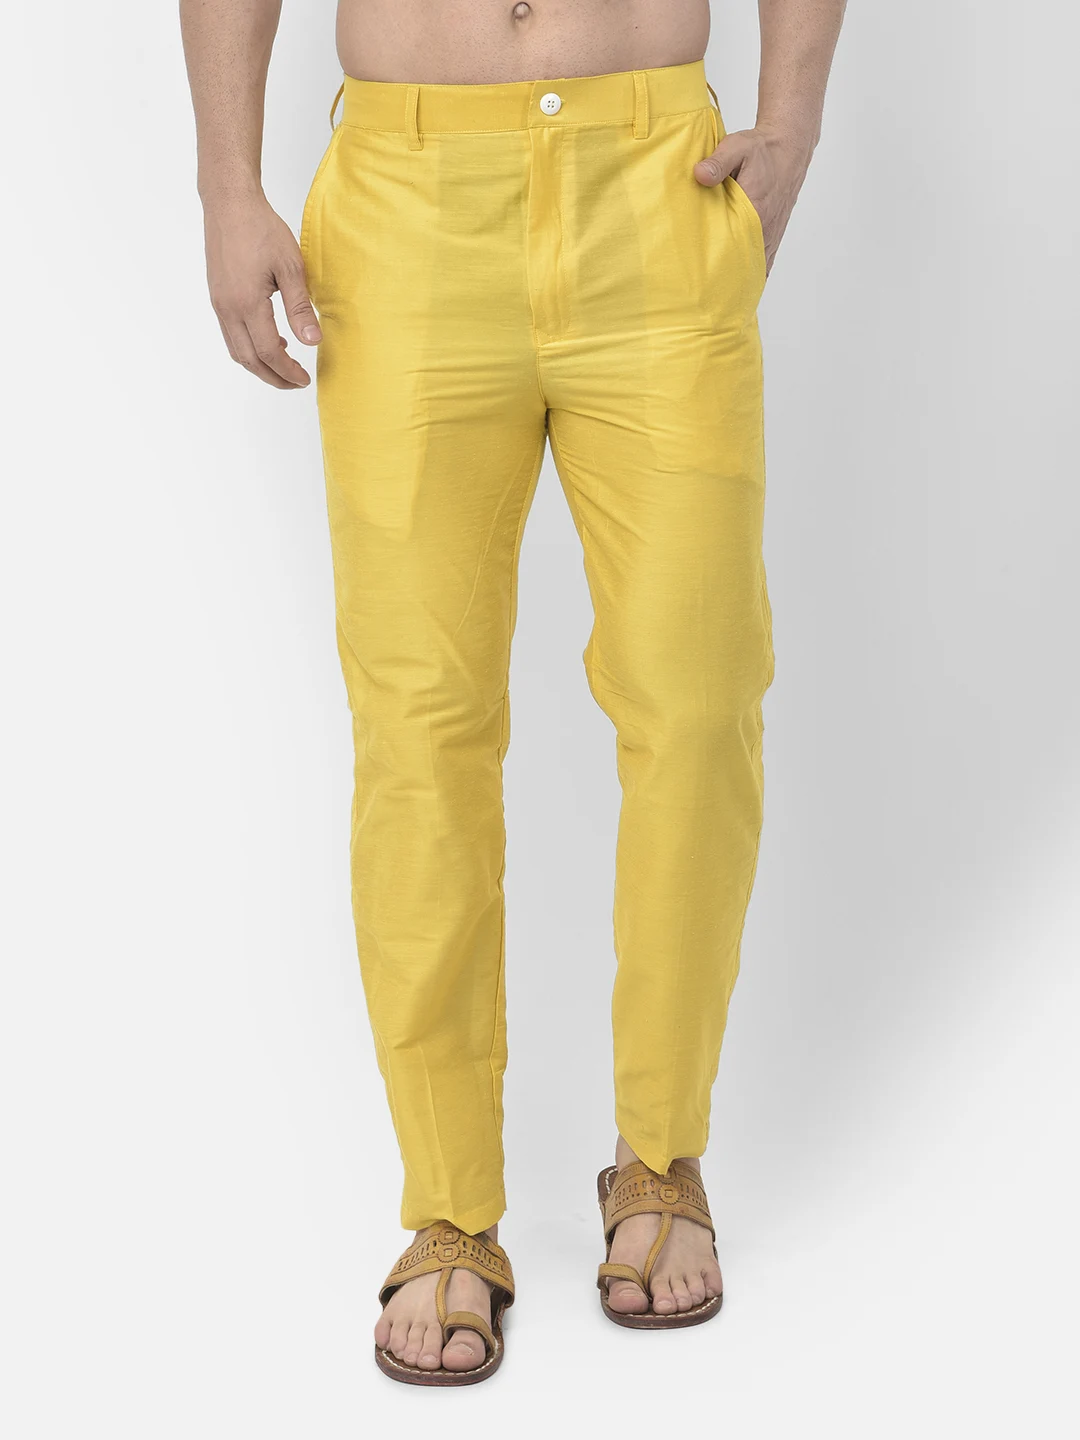 Buy Mustard Cotton Slub Solid Women Pant for Best Price, Reviews, Free  Shipping